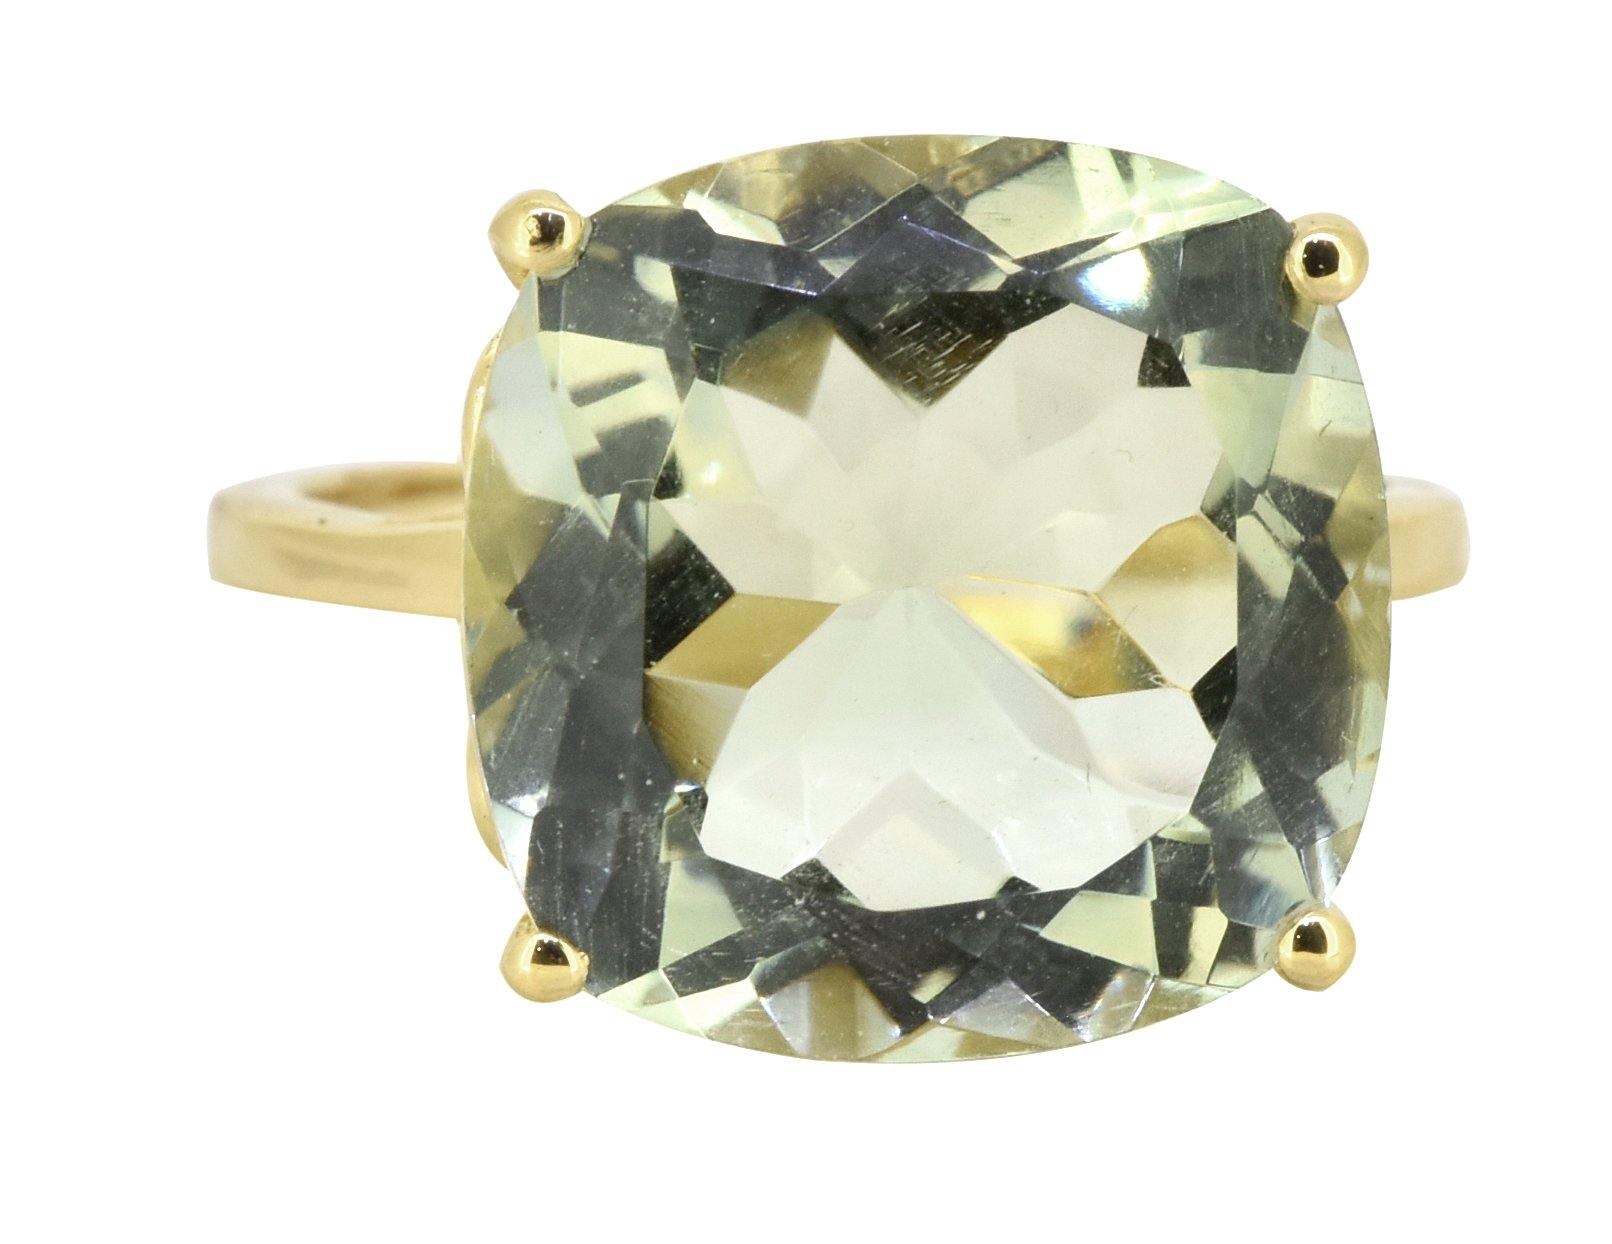 Green Amethyst Solid 925 Sterling Silver Gold Plated Statement Ring Jewelry - YoTreasure